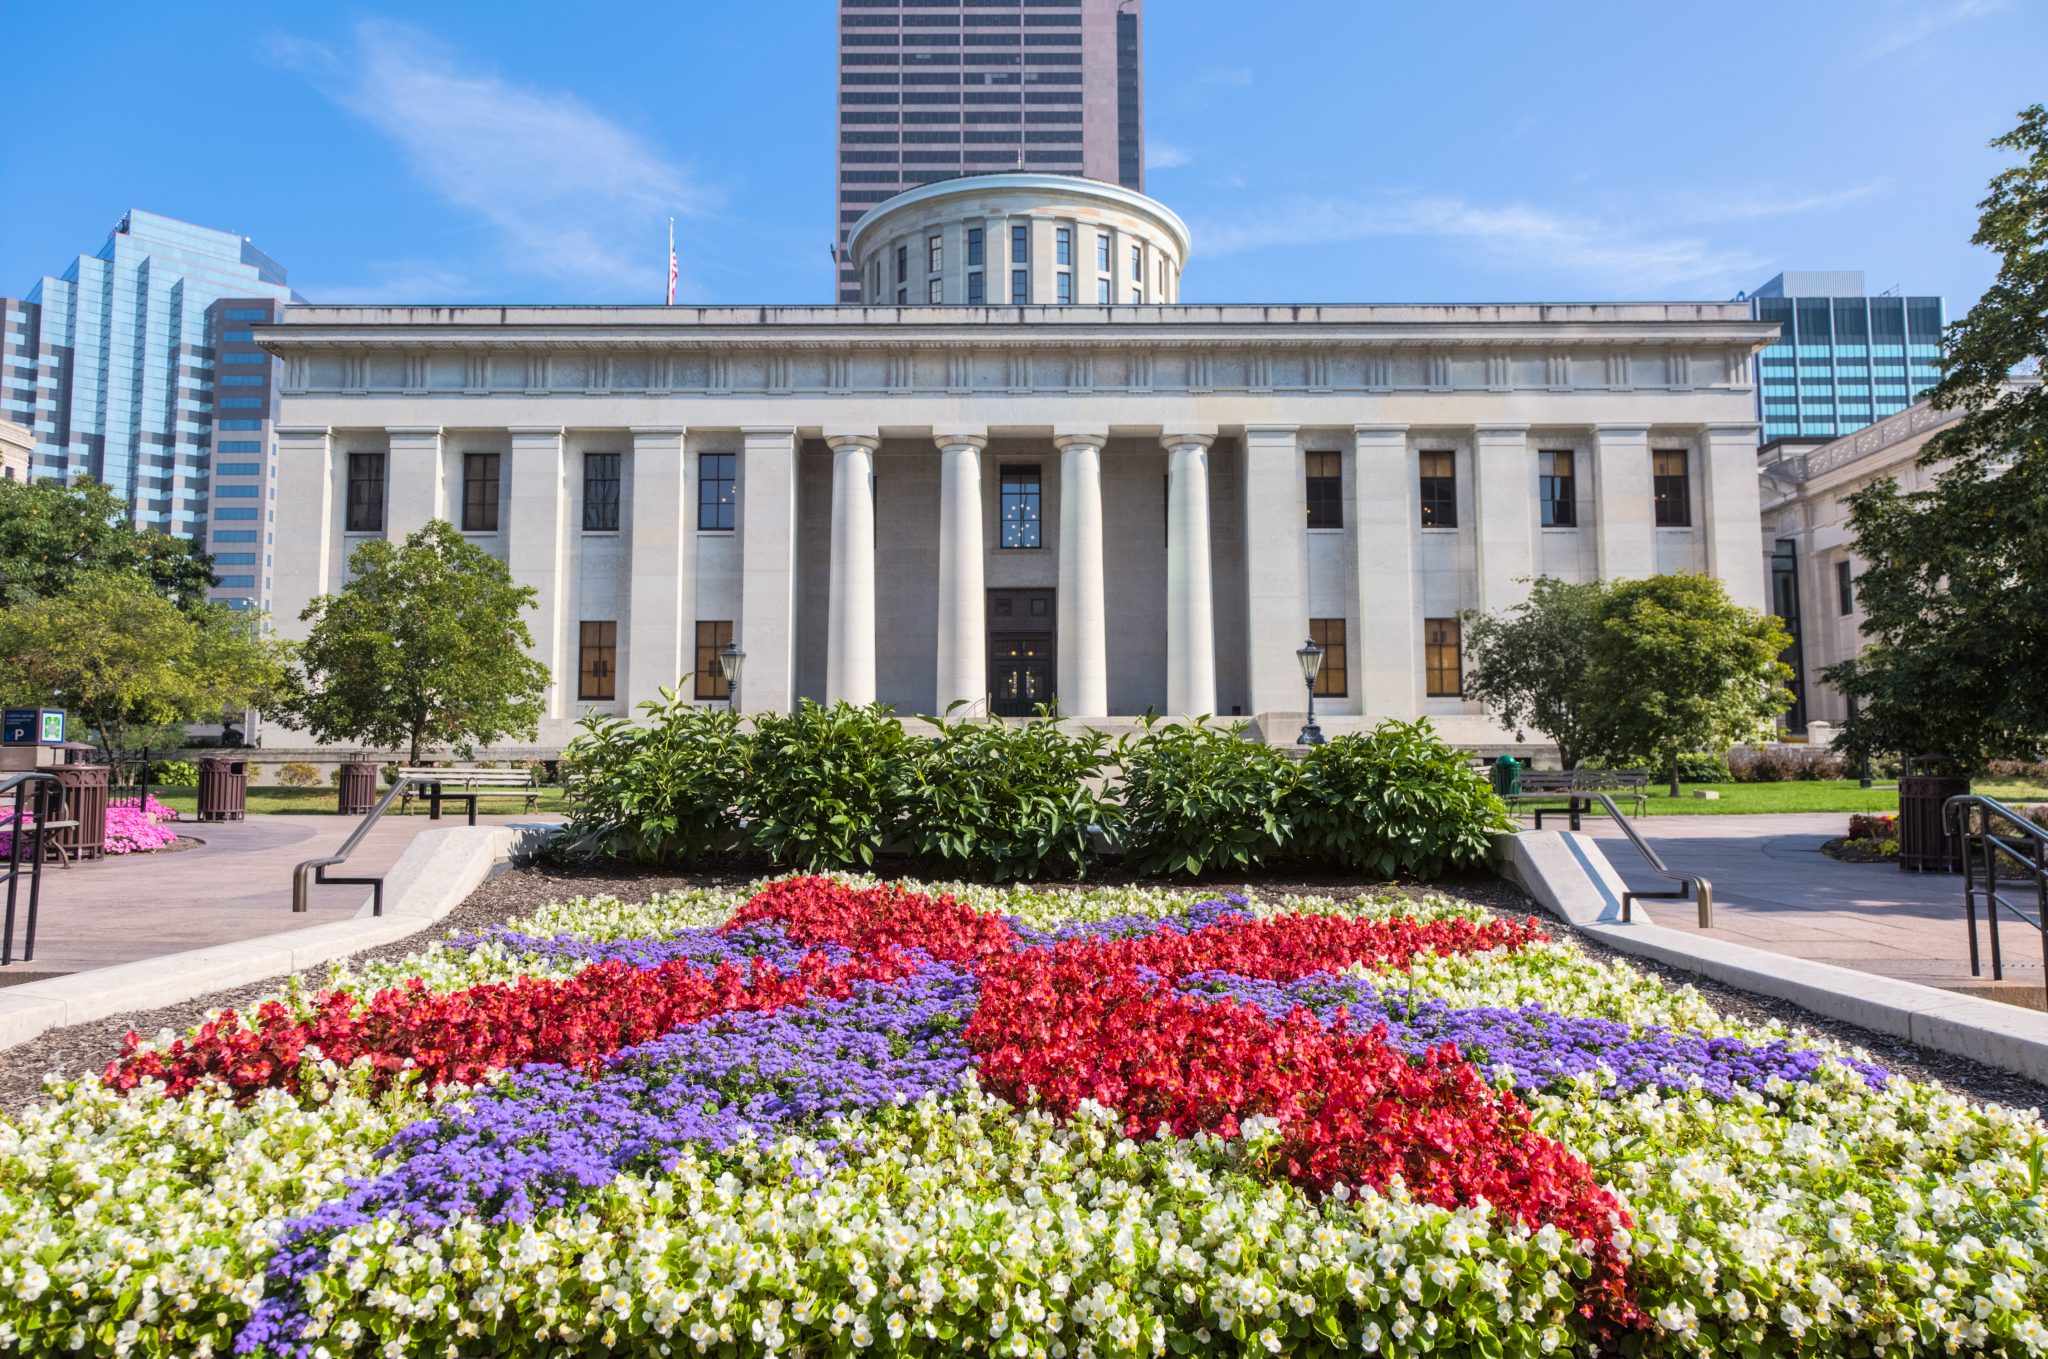 Ohio Statehouse With Colorful Flower Garden